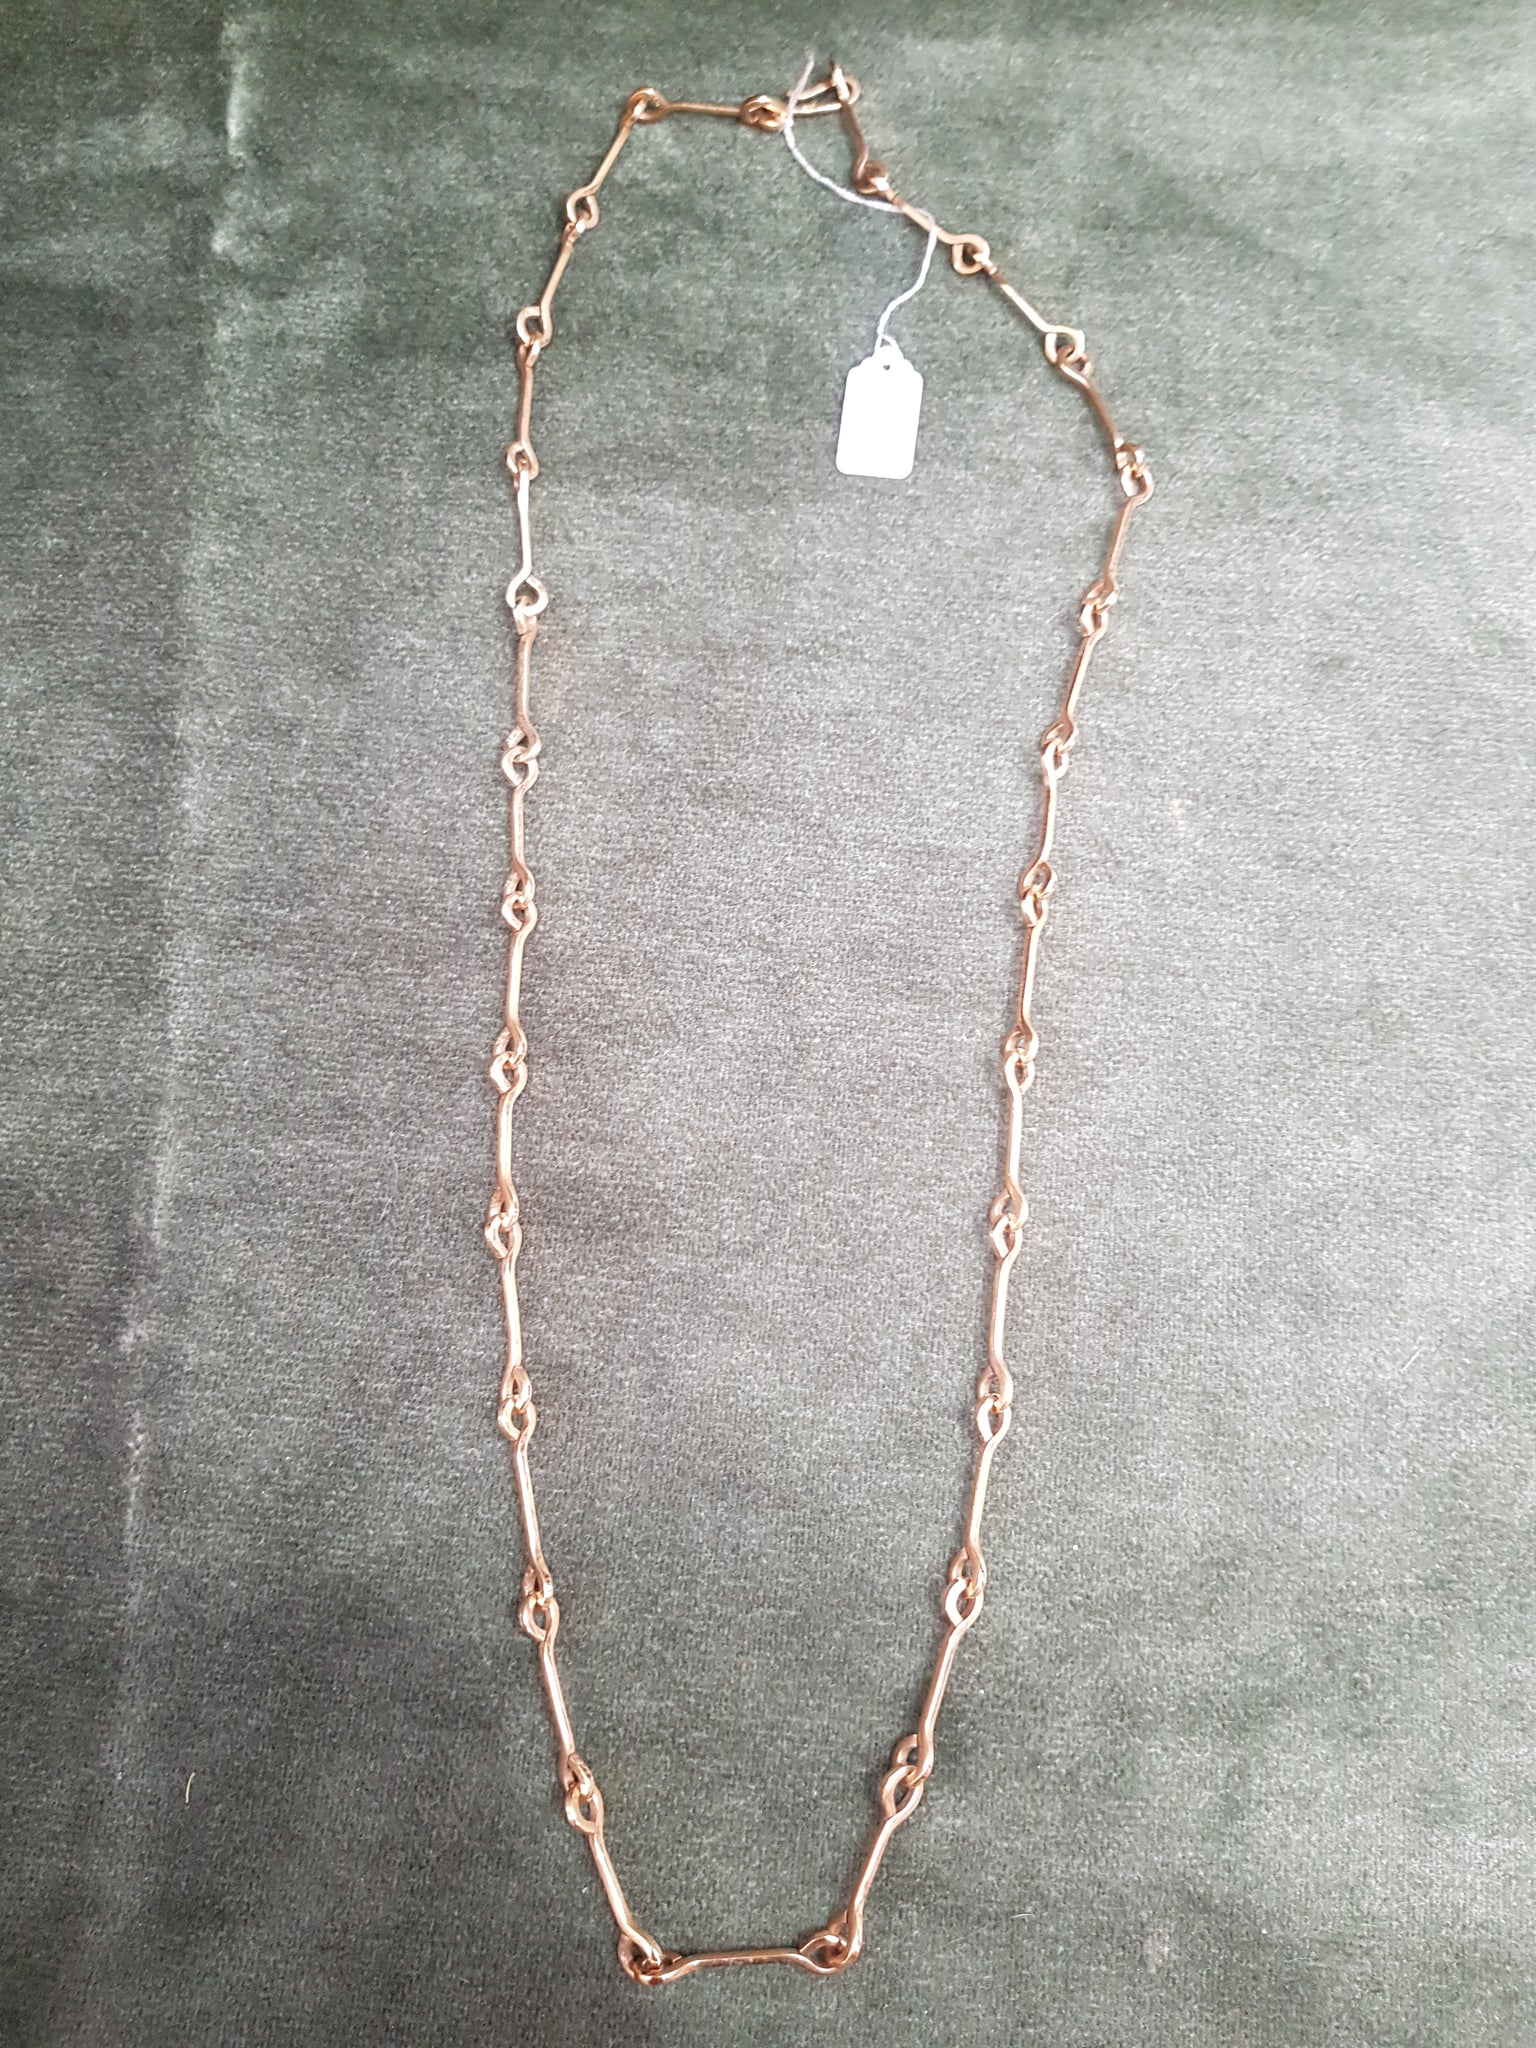 c1970 9ct Gold chain link necklace 31gms #235